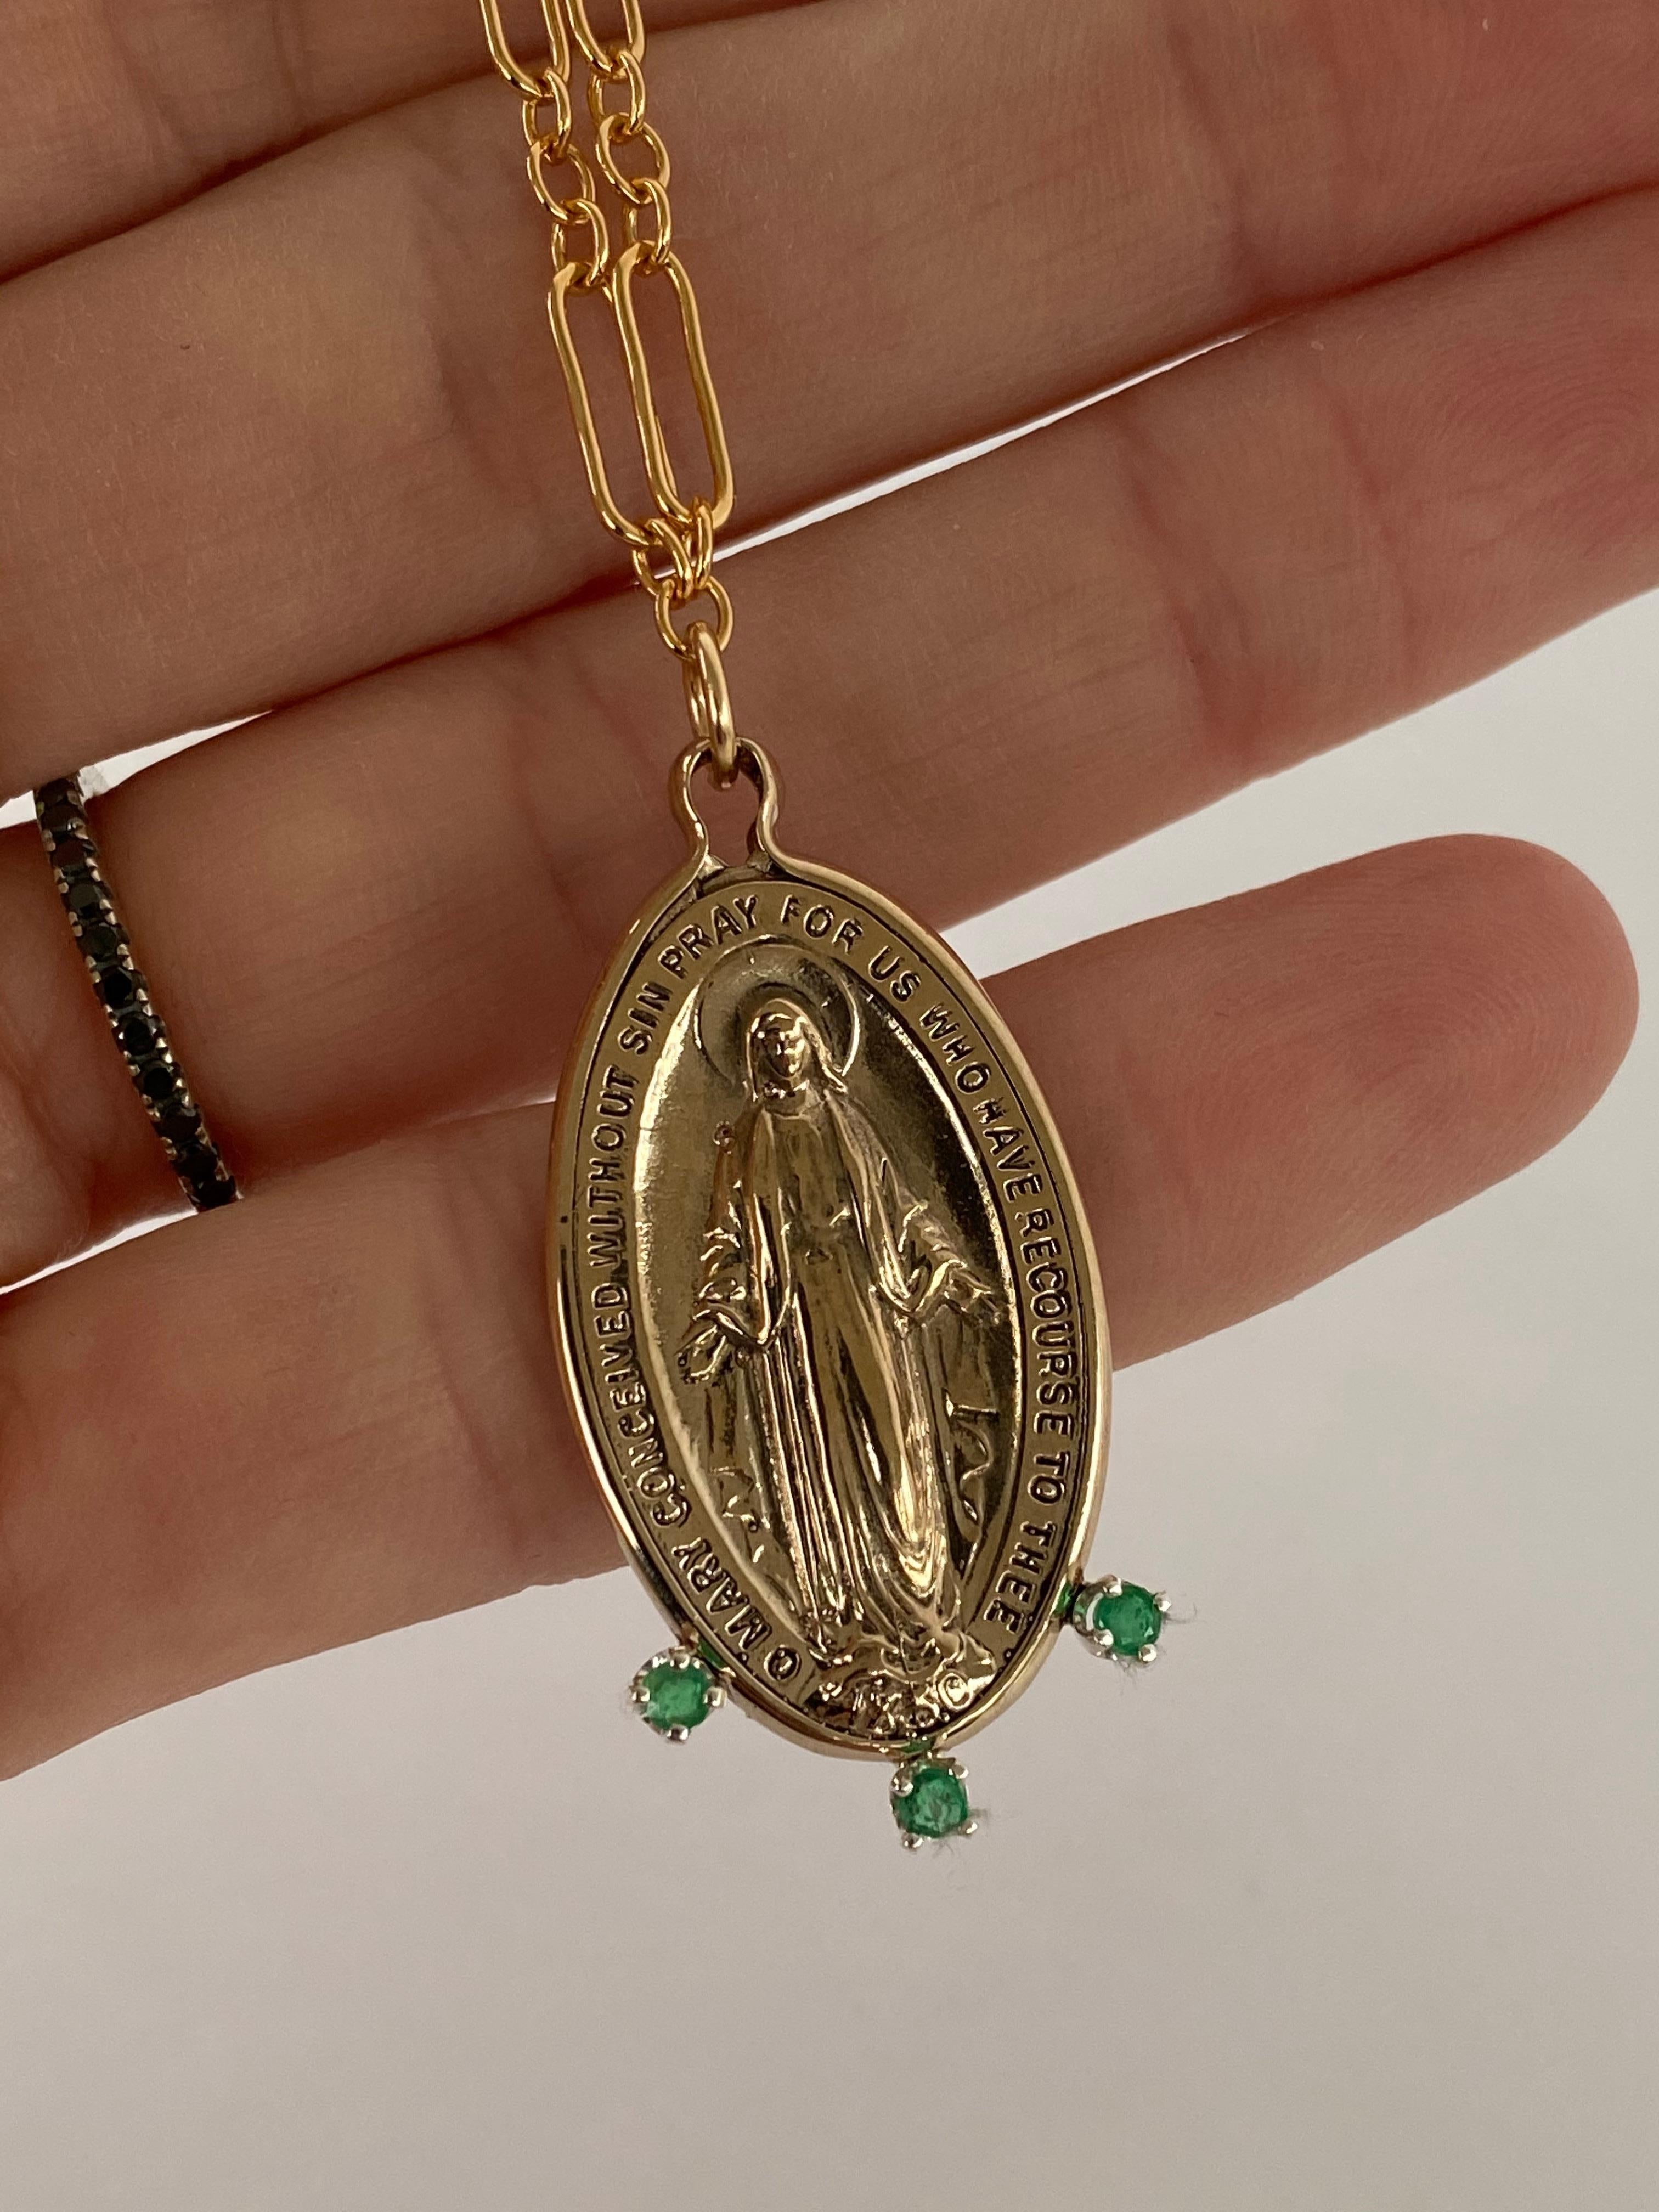 Victorian Emerald Virgin Mary Oval Medal Chain Necklace Gold Filled Chain J Dauphin For Sale